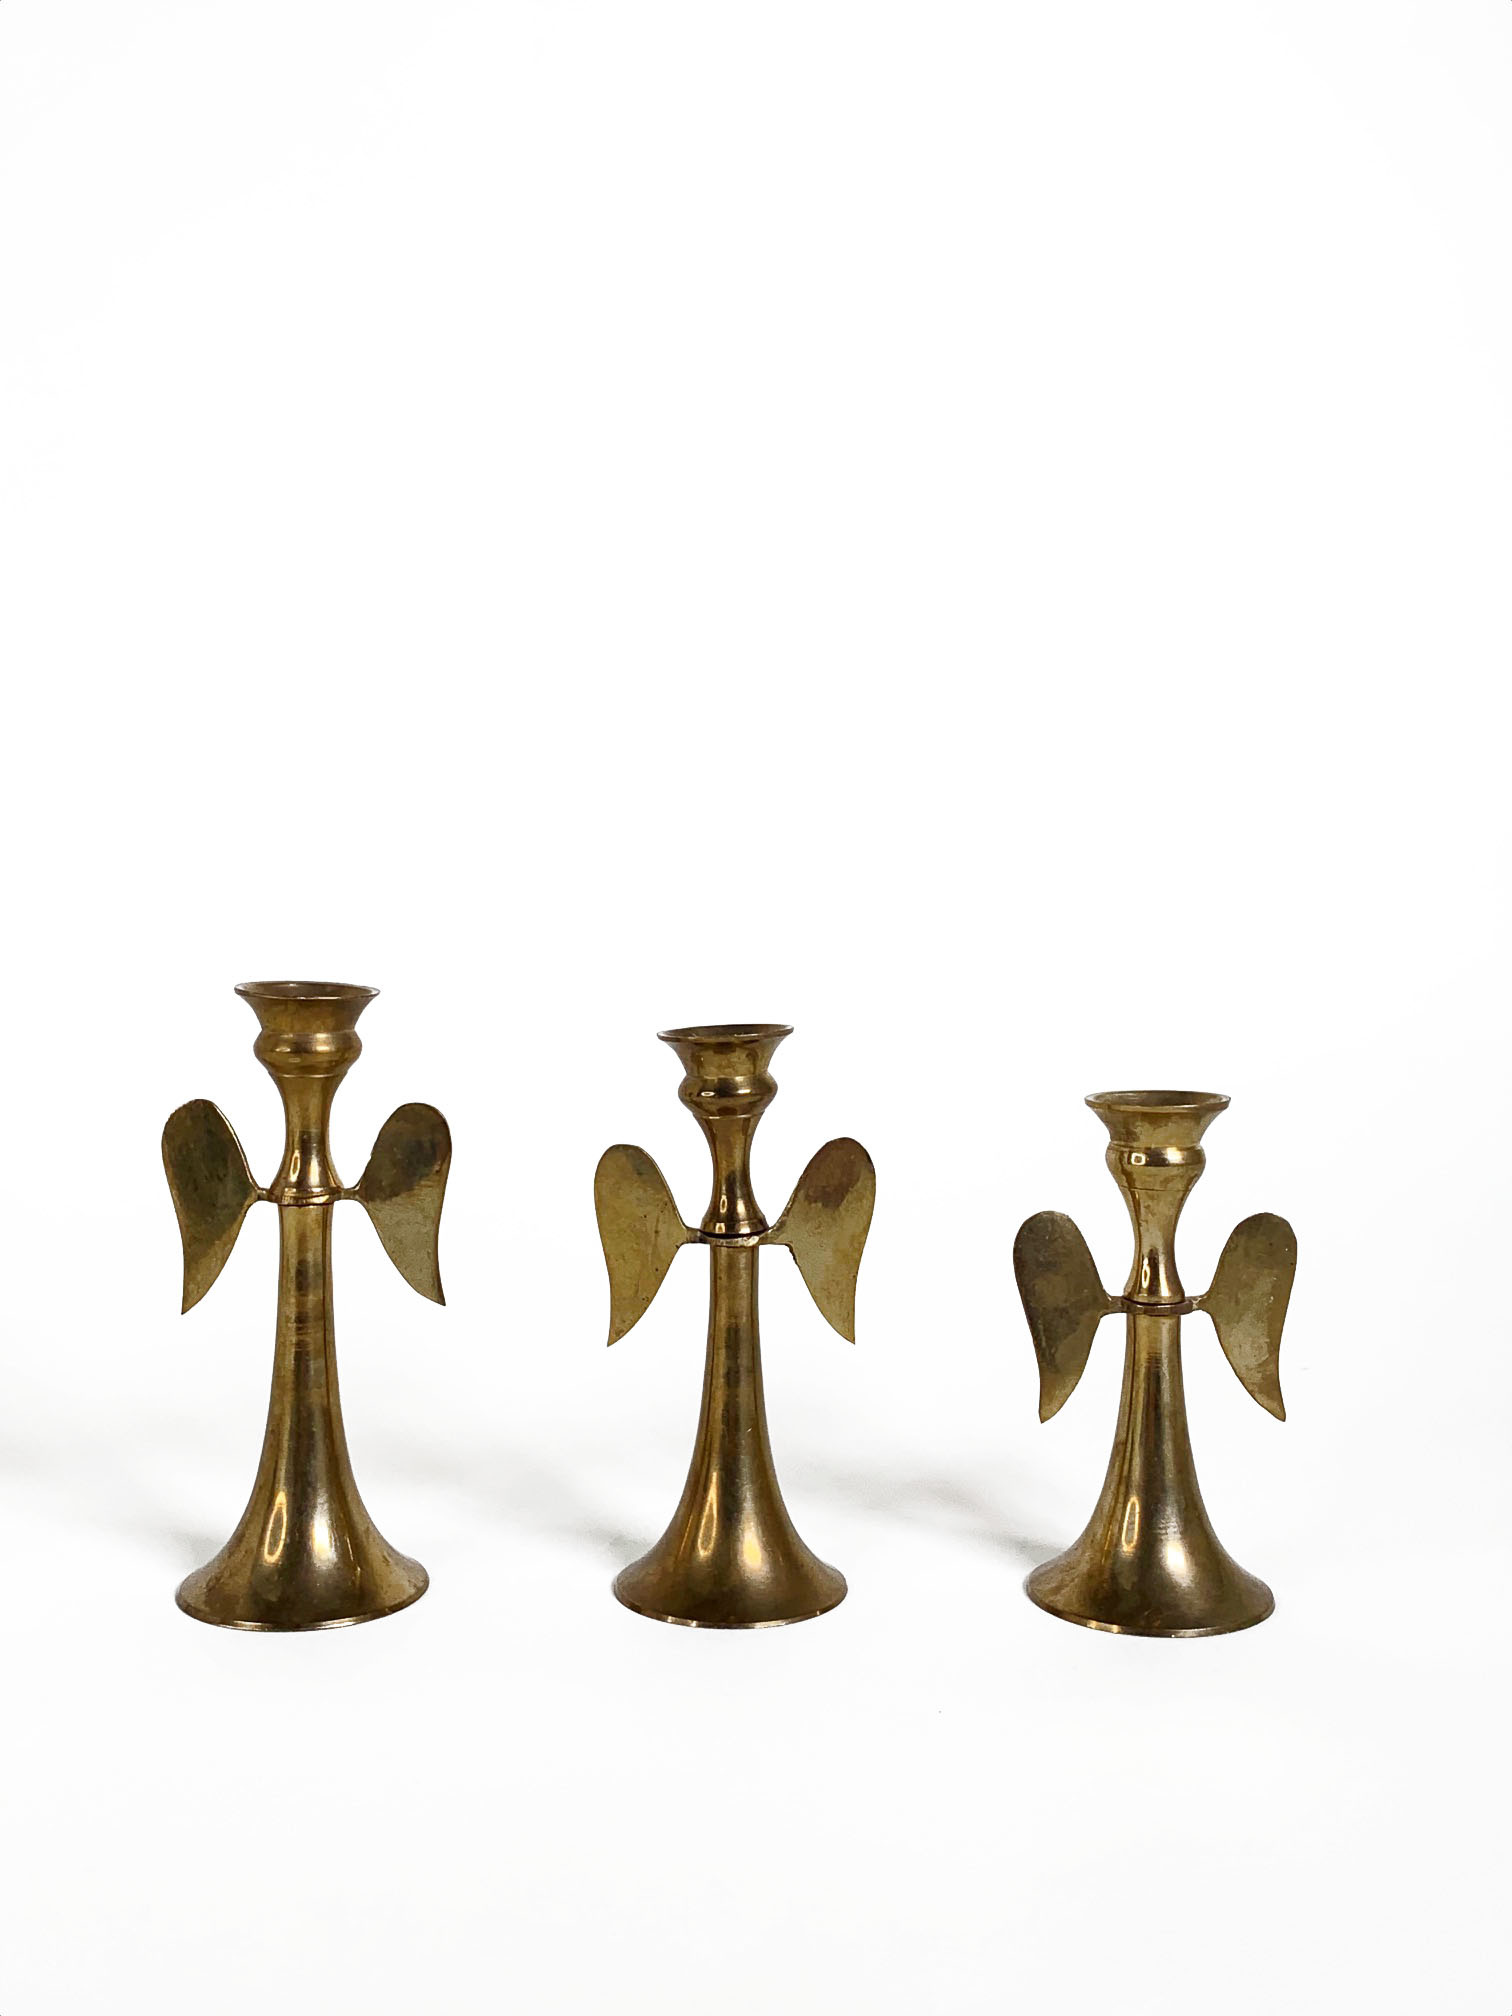 Vintage set of three brass angel wings candle holders - Curiosa